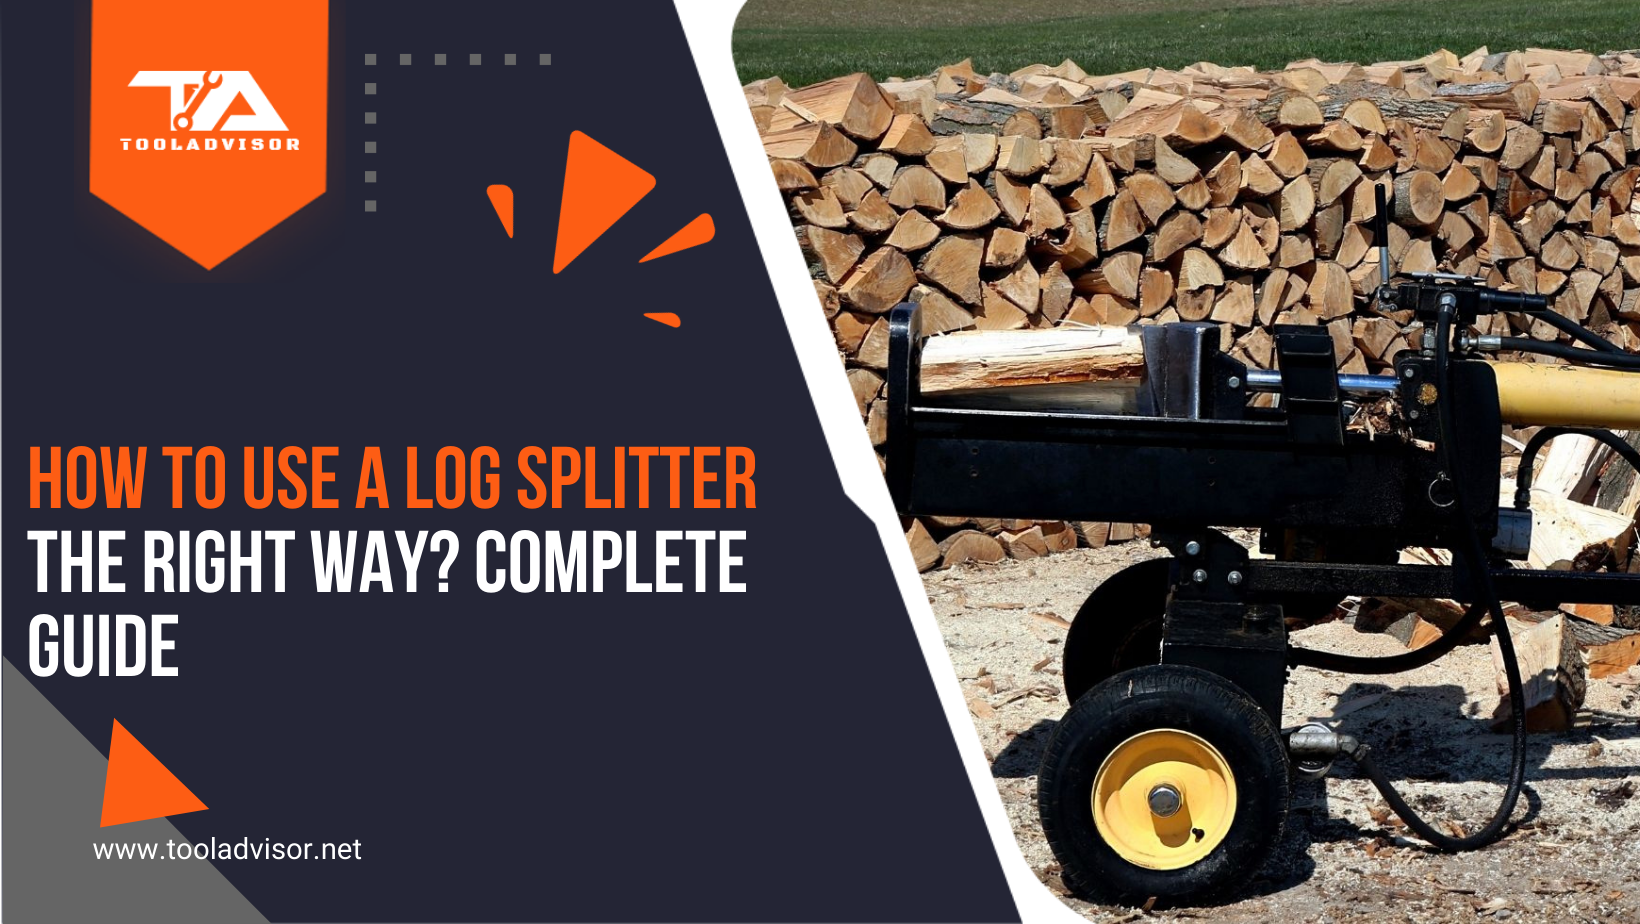 How to Use a Log Splitter